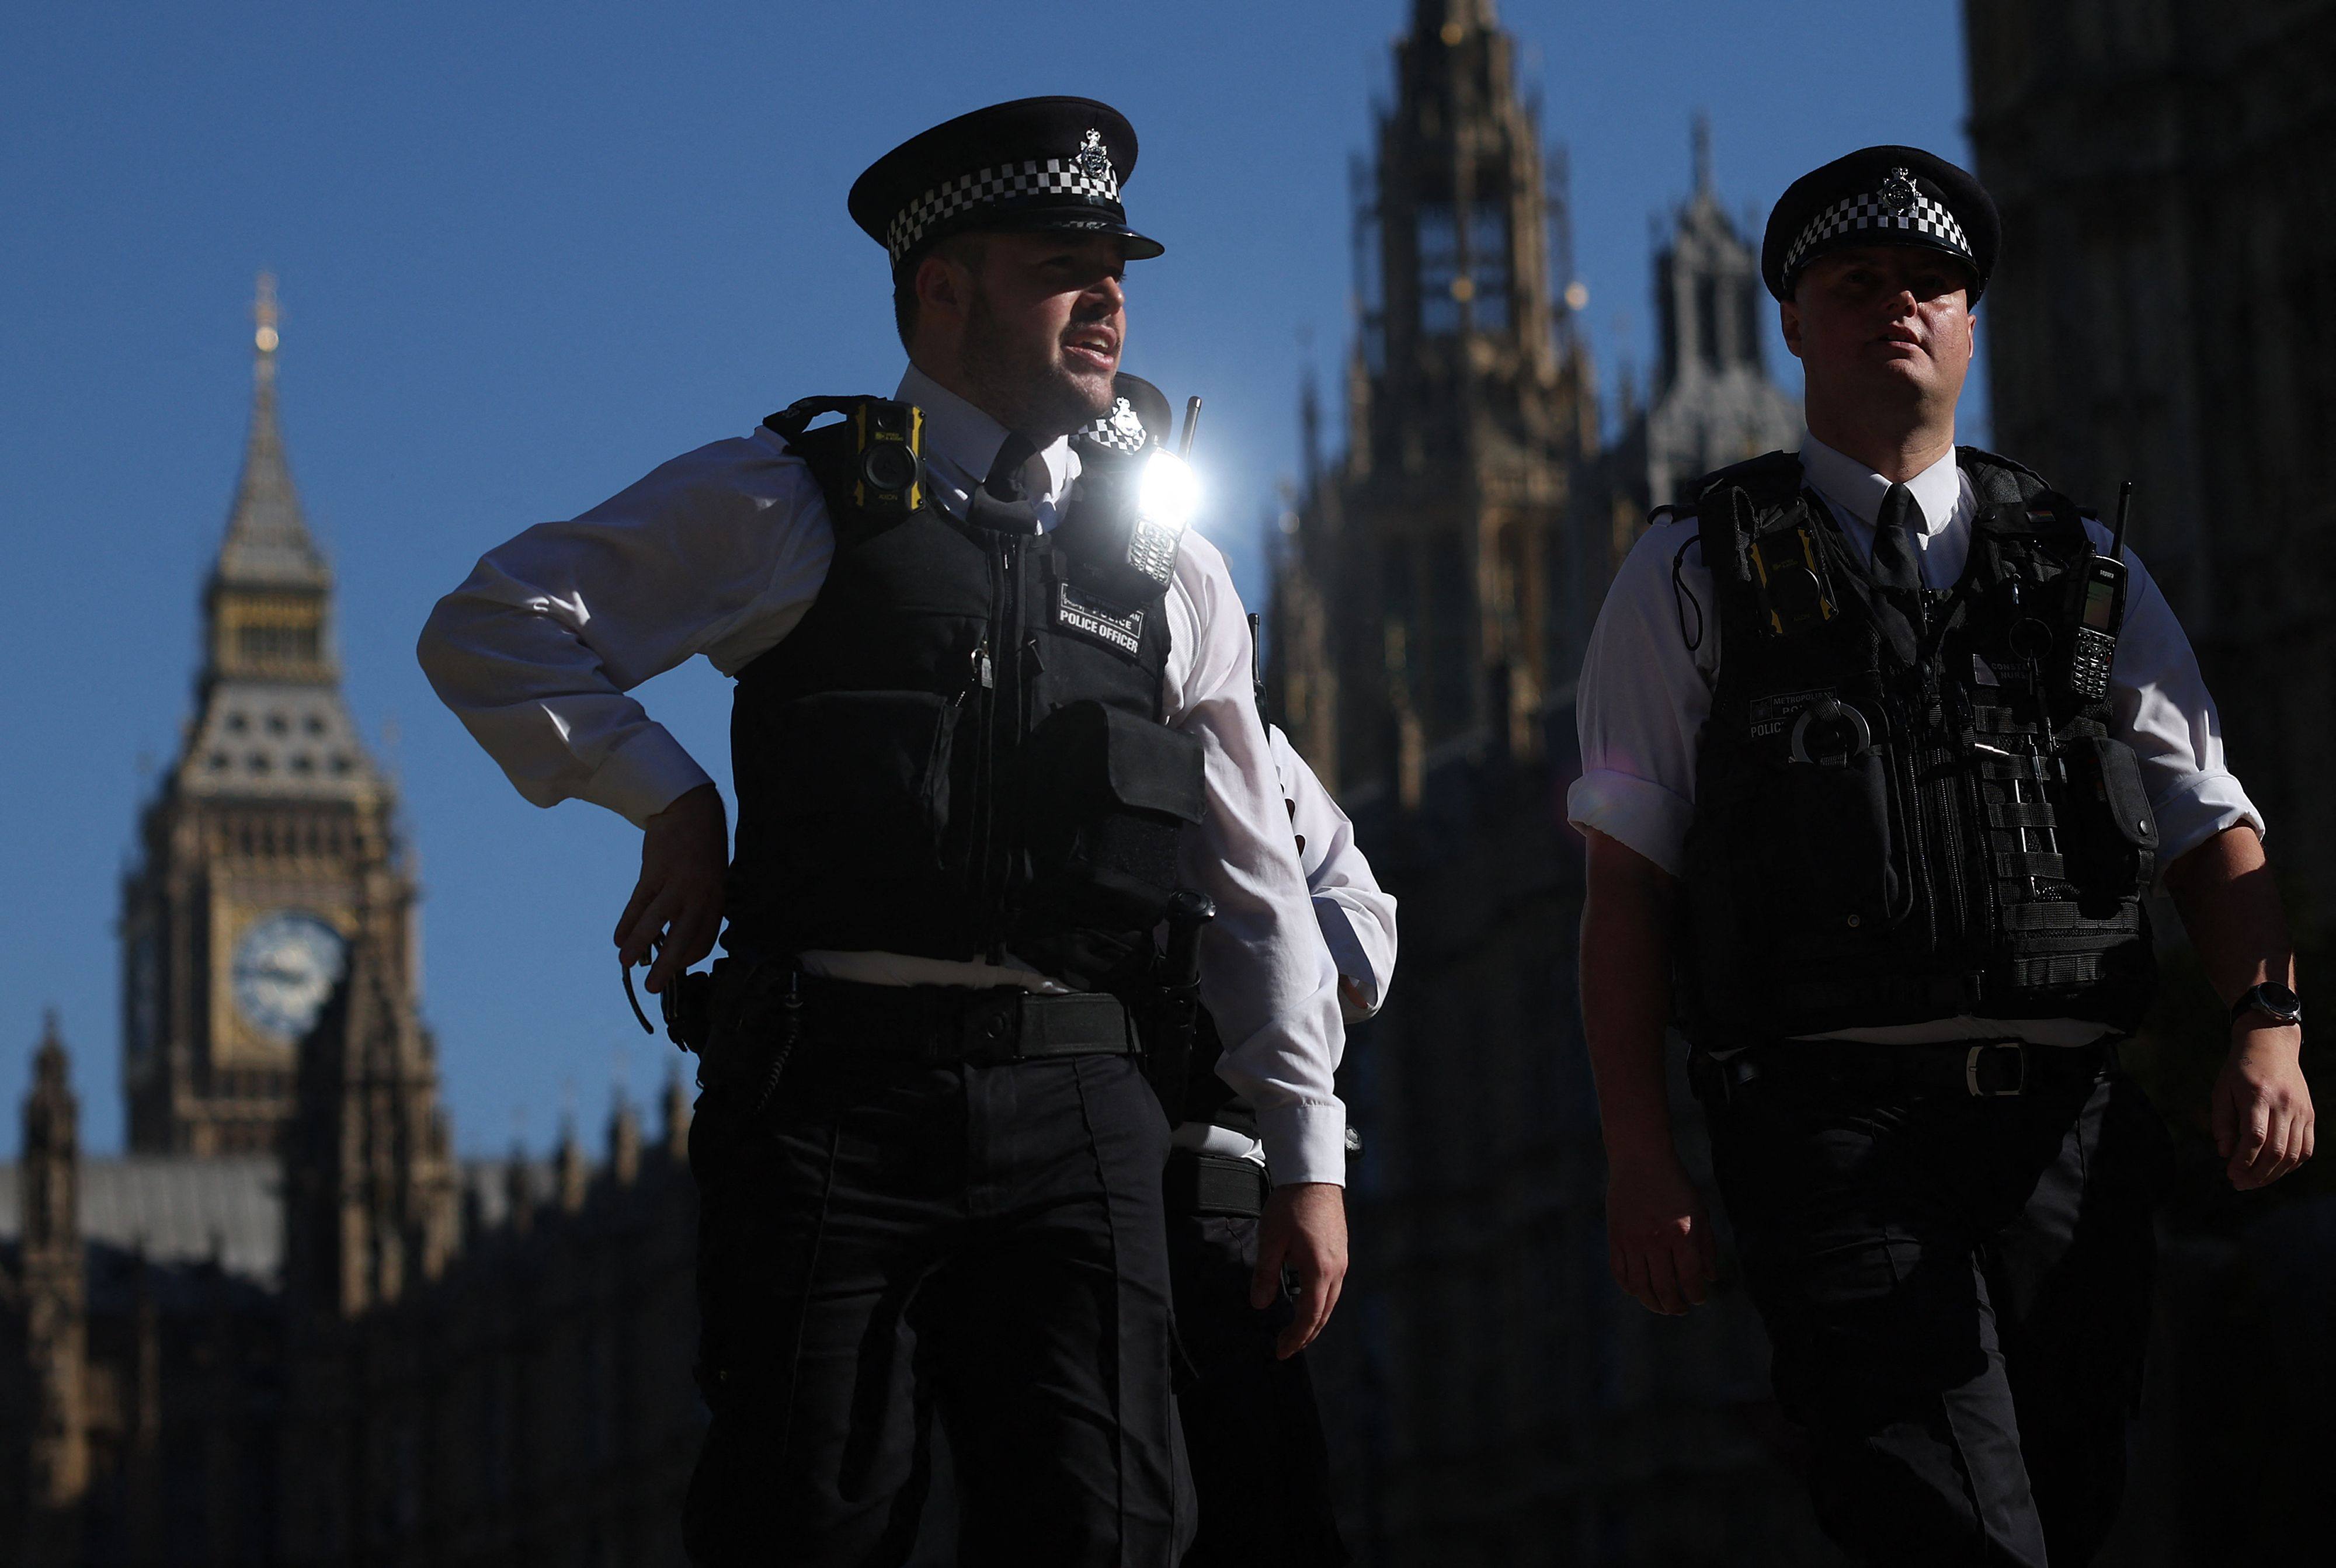 Metropolitan Police officers walk past the Palace of Westminster, home to the Houses of Parliament in London, on Monday. Photo: AFP